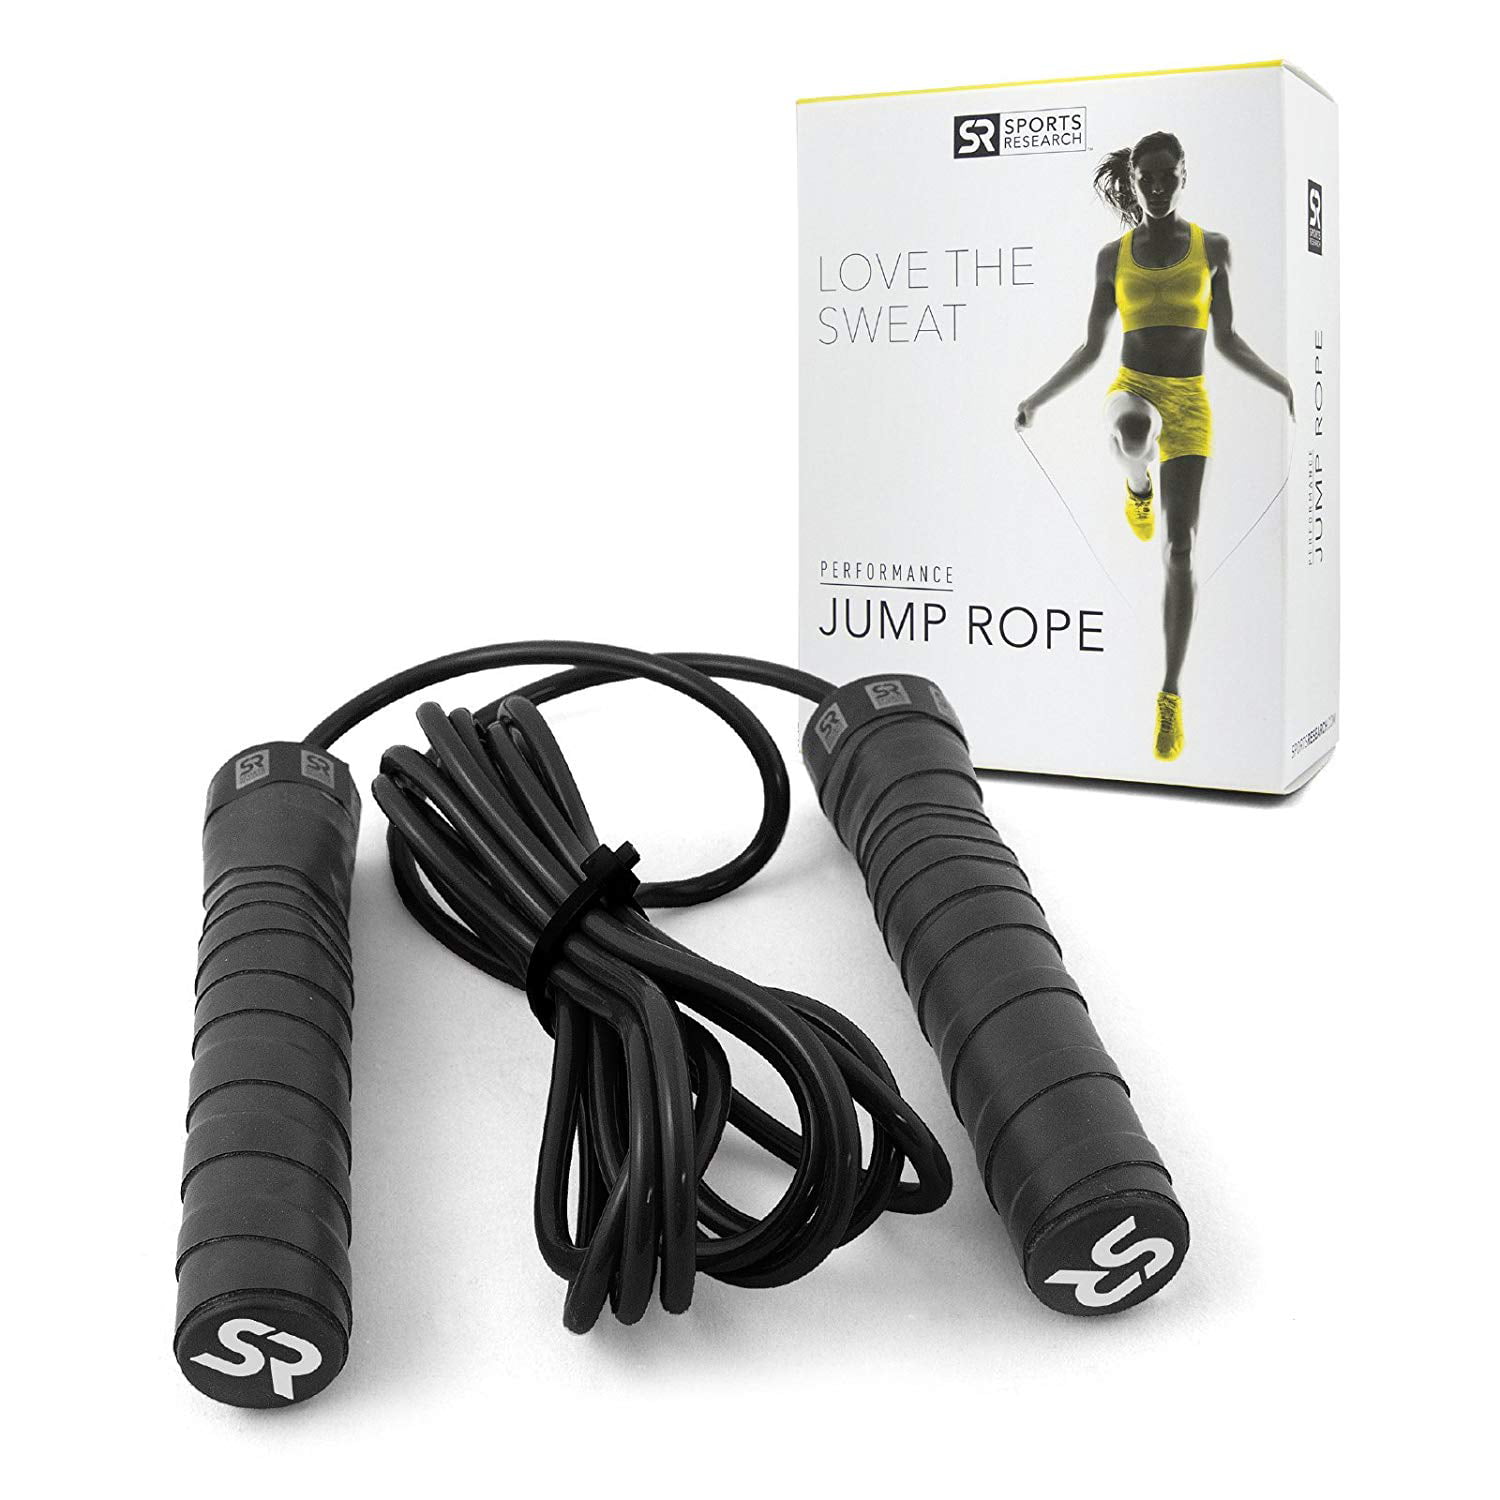 Adjustable-Length Rope for Fitness and Speed Training Sweet Sweat Performance Jump Rope by Sports Research Includes Bonus Sweet Sweat Gel Sample! 